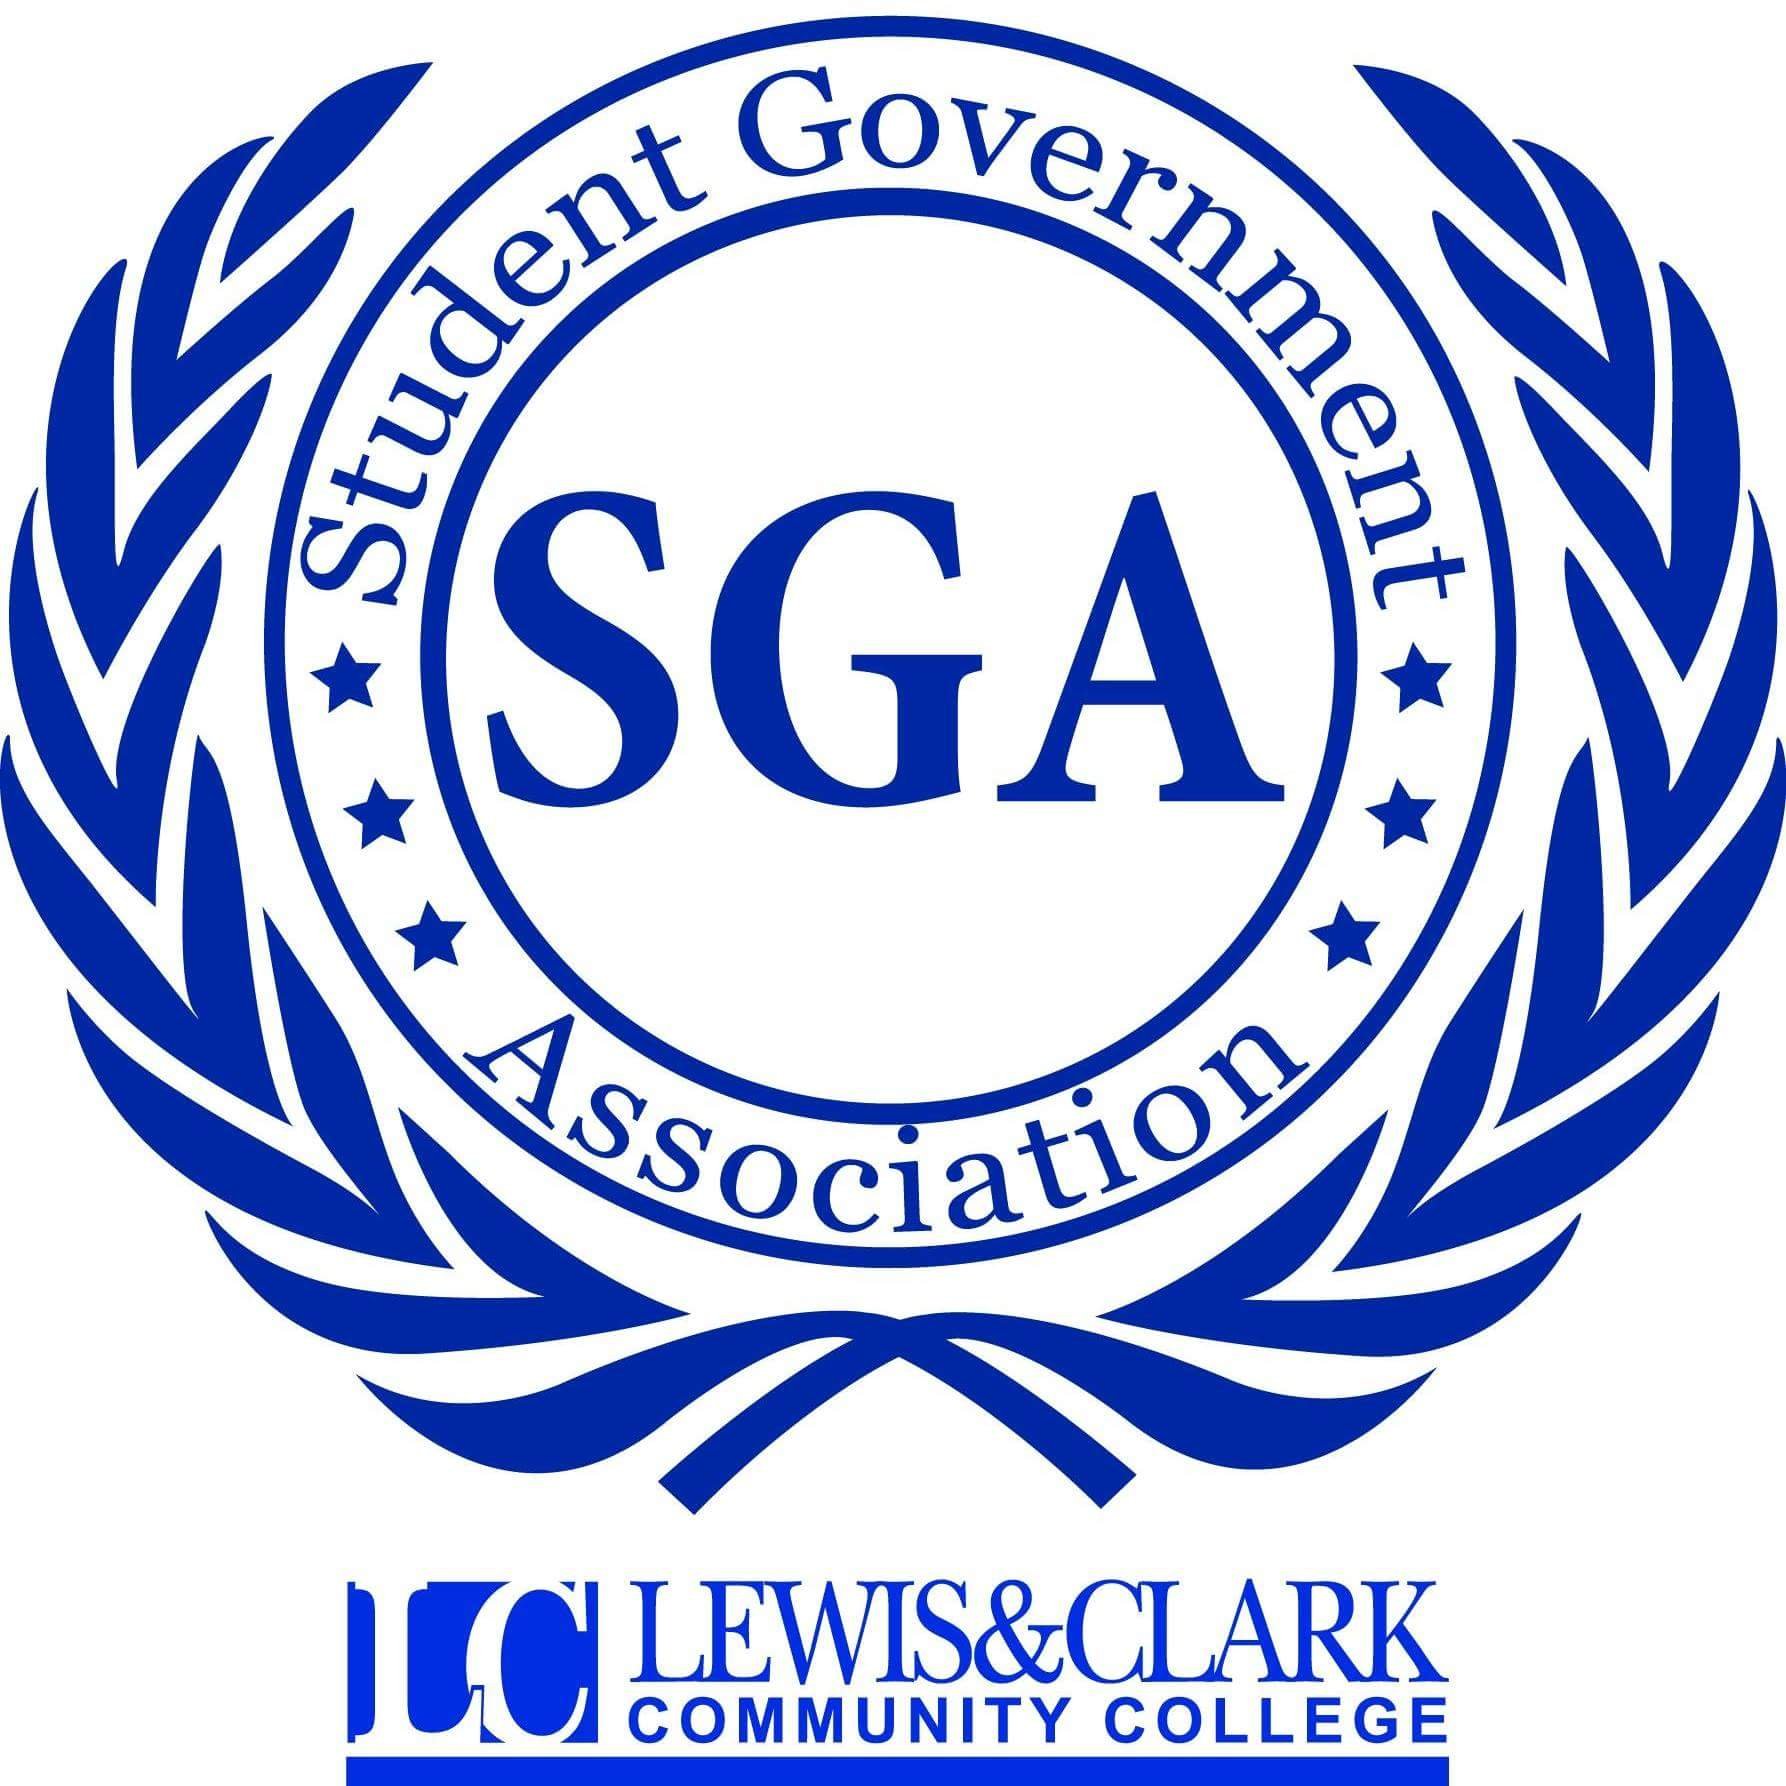 L&C’s Student Government Association (SGA) oversees all student clubs, provides funding for club activities, and formulates policies affecting the student body.